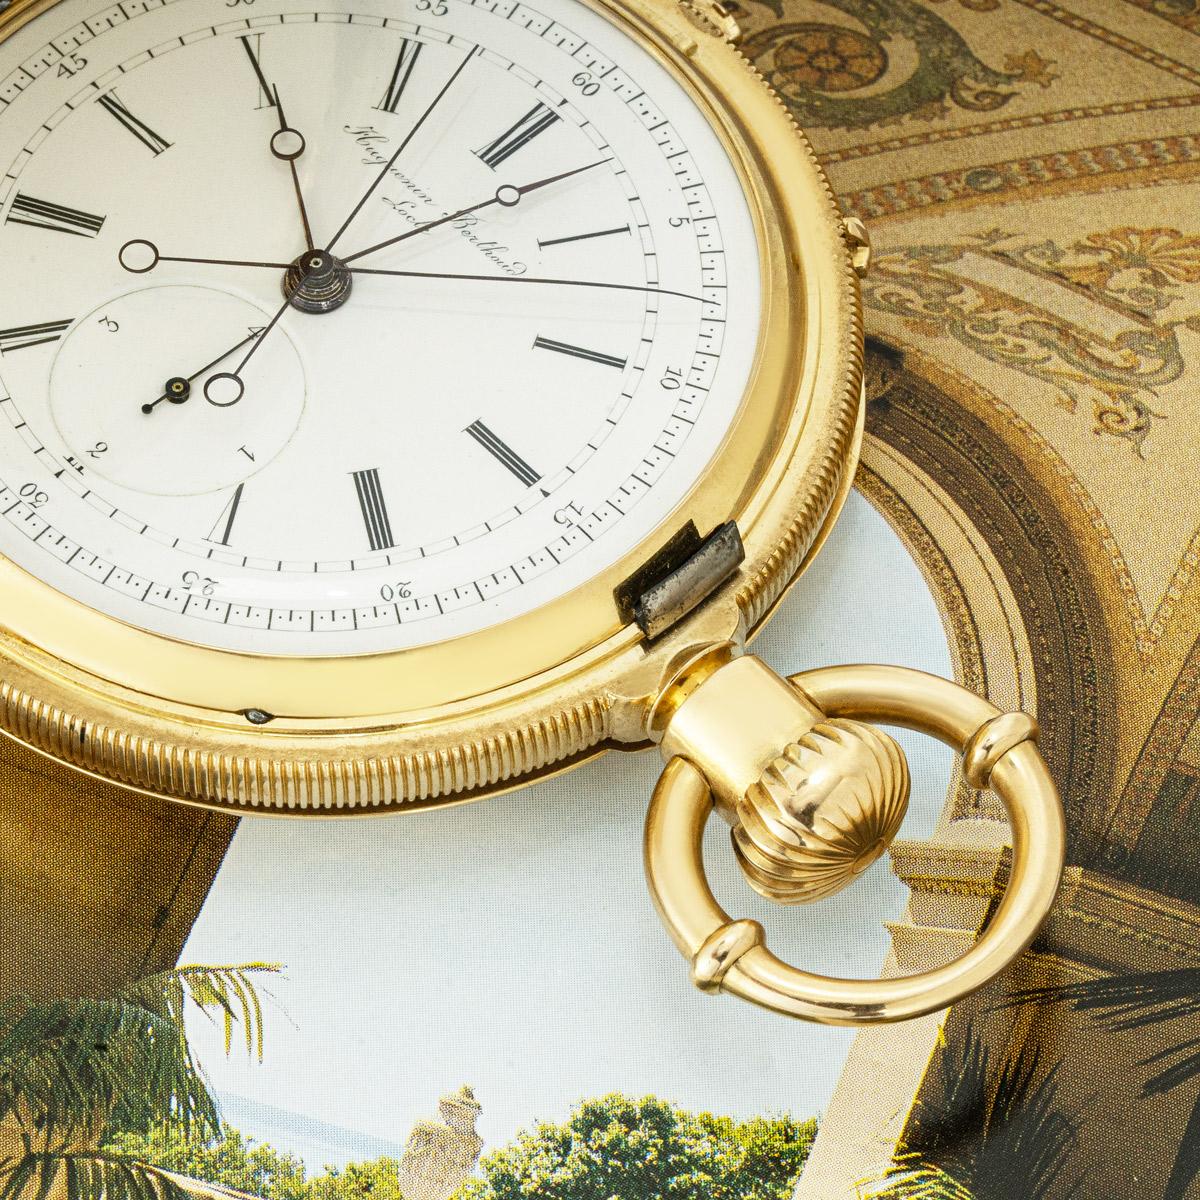 Huguenin Berthoud Locle. A Rare Early 18ct Yellow Gold, Hunting Cased, Keywind Watch with Independent Split Seconds and 1/4 Seconds Chronograph Diablotine C1860

Dial: The white enamel dial fully signed Huguenin Berthoud Locle with Roman hour